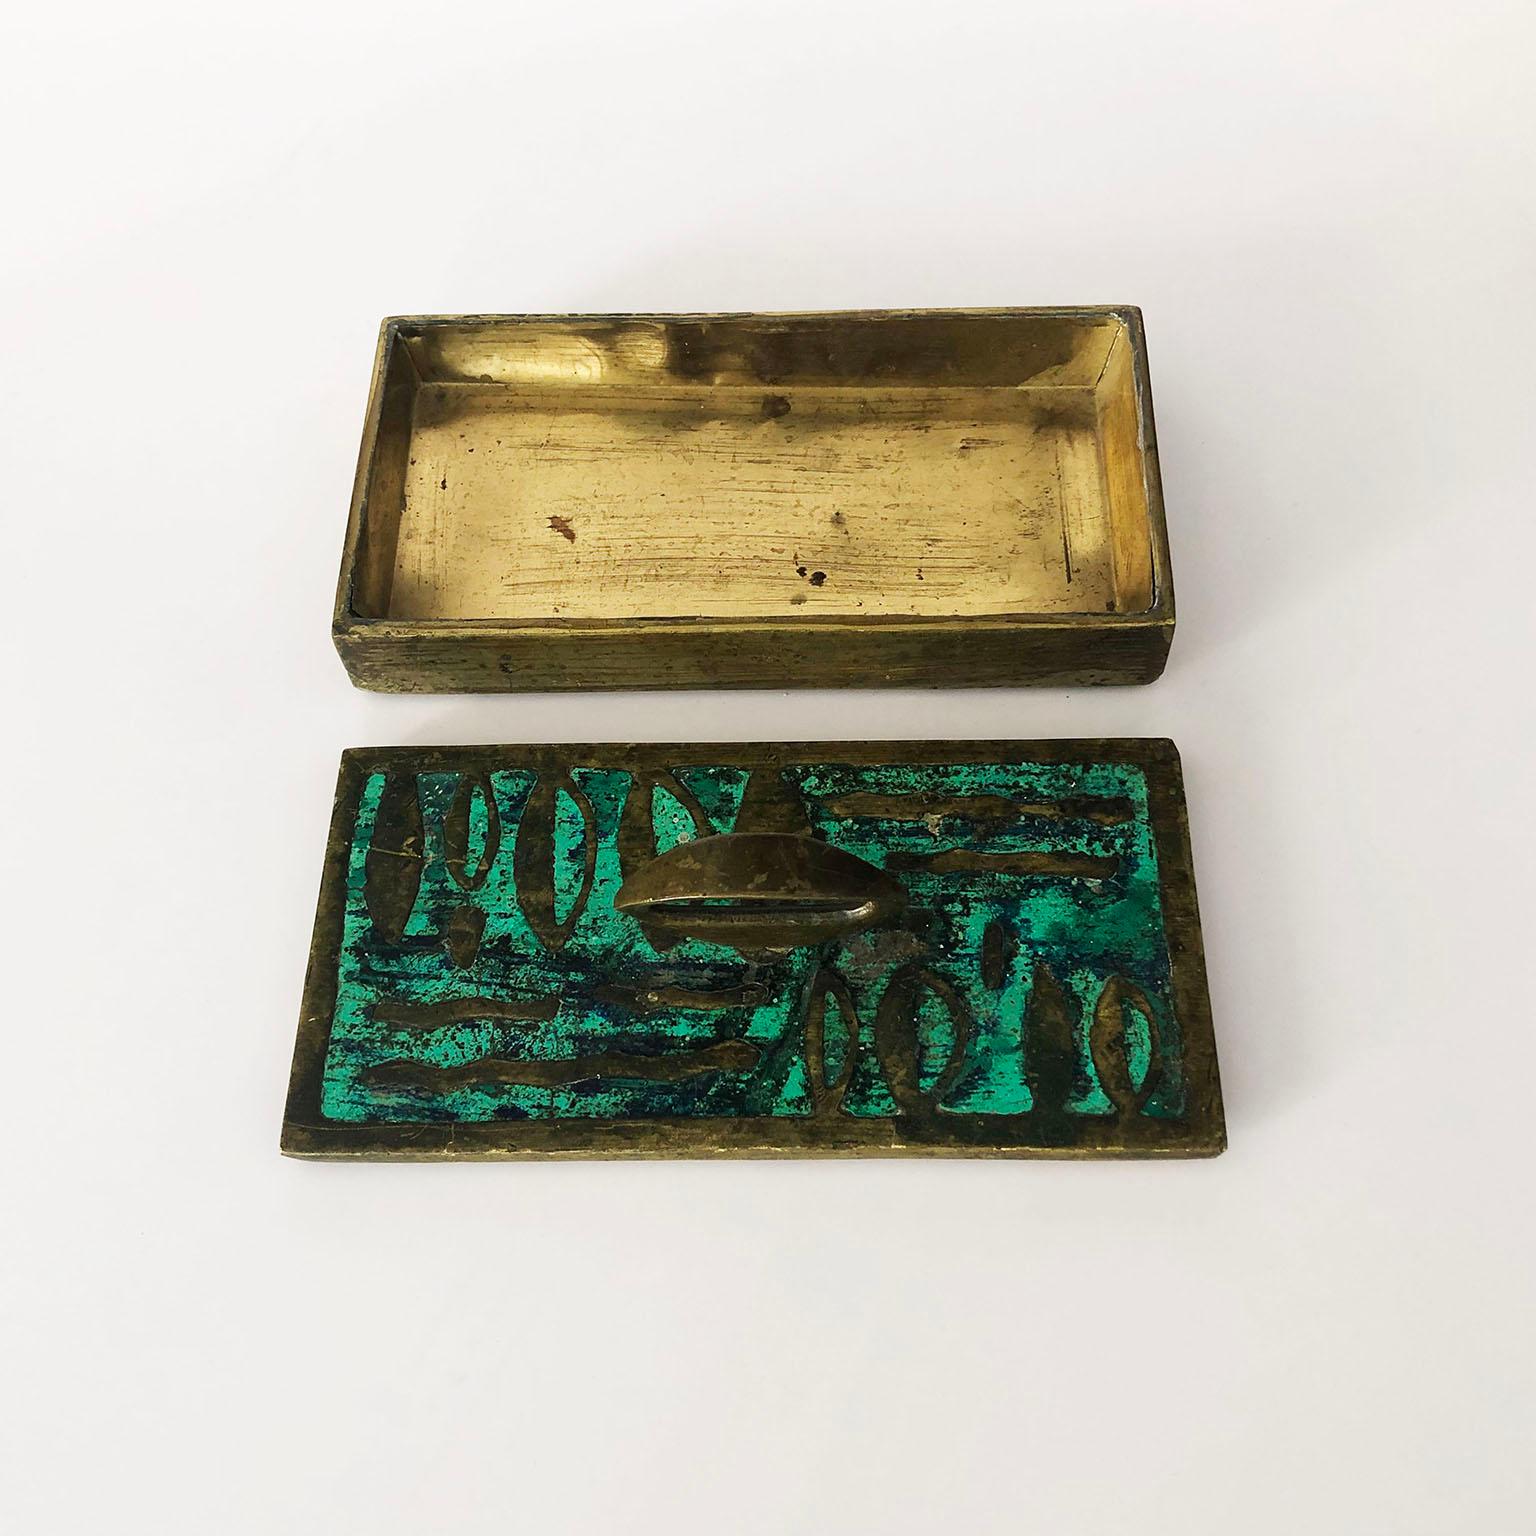 Circa 1950 we offer this rare box made in solid brass and Malachite designed by Pepe Mendoza in Mexico.

Designer, Pepe Mendoza ran a foundry in Mexico that produced a limited number of furniture pieces and decorative objects in the late 1950s and